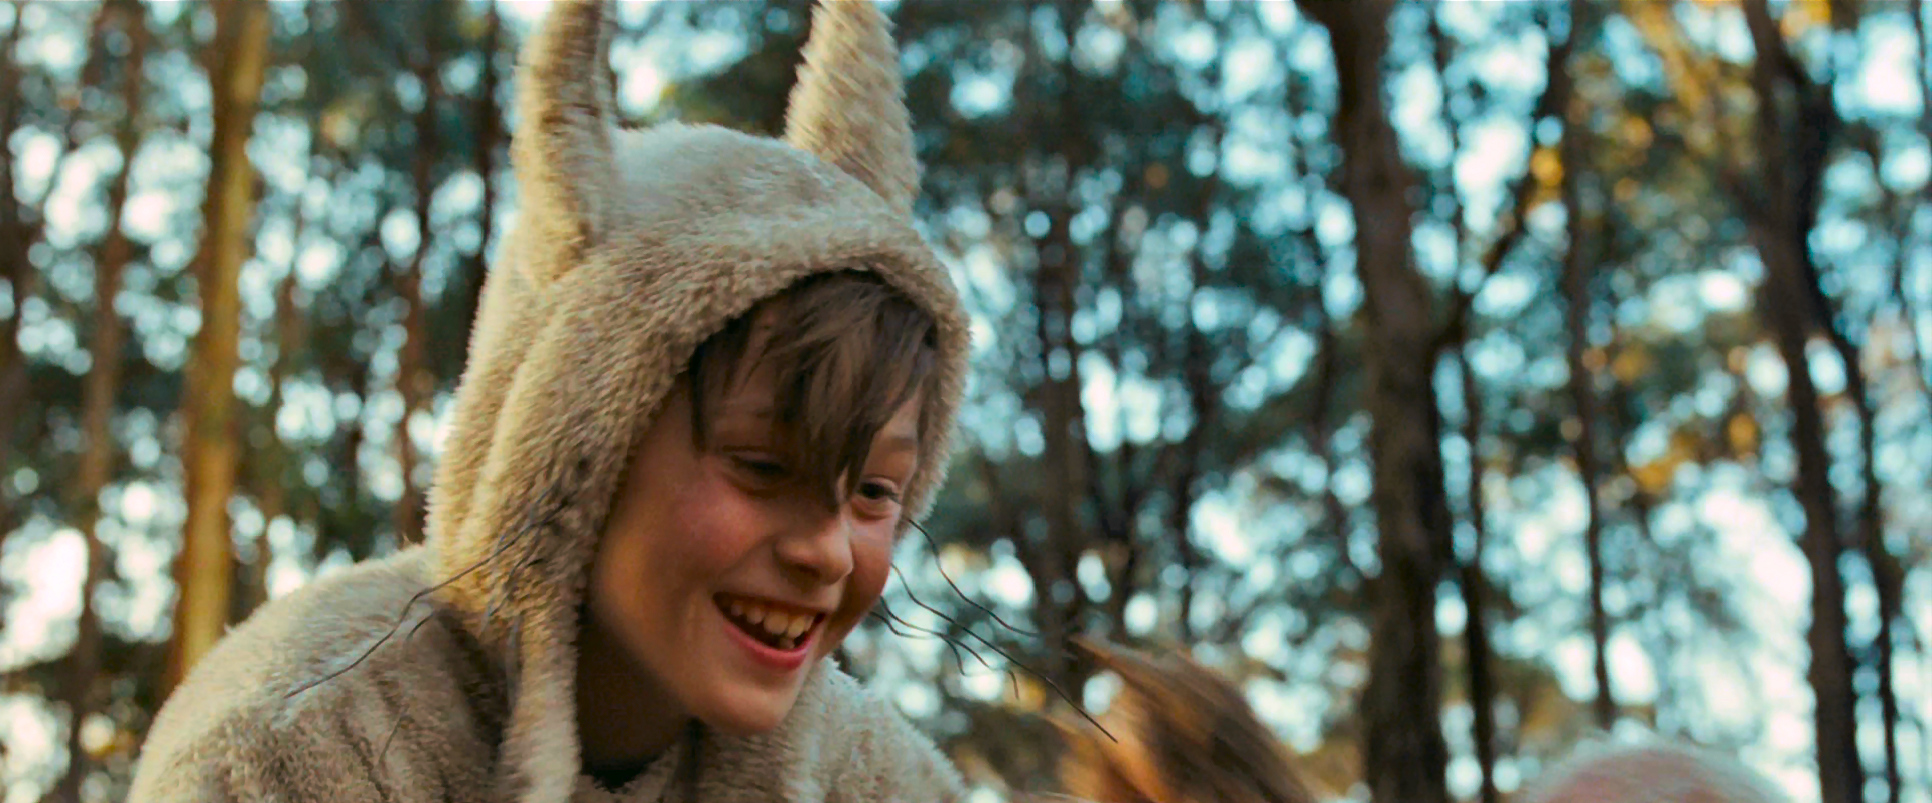 Where the Wild Things Are - Max